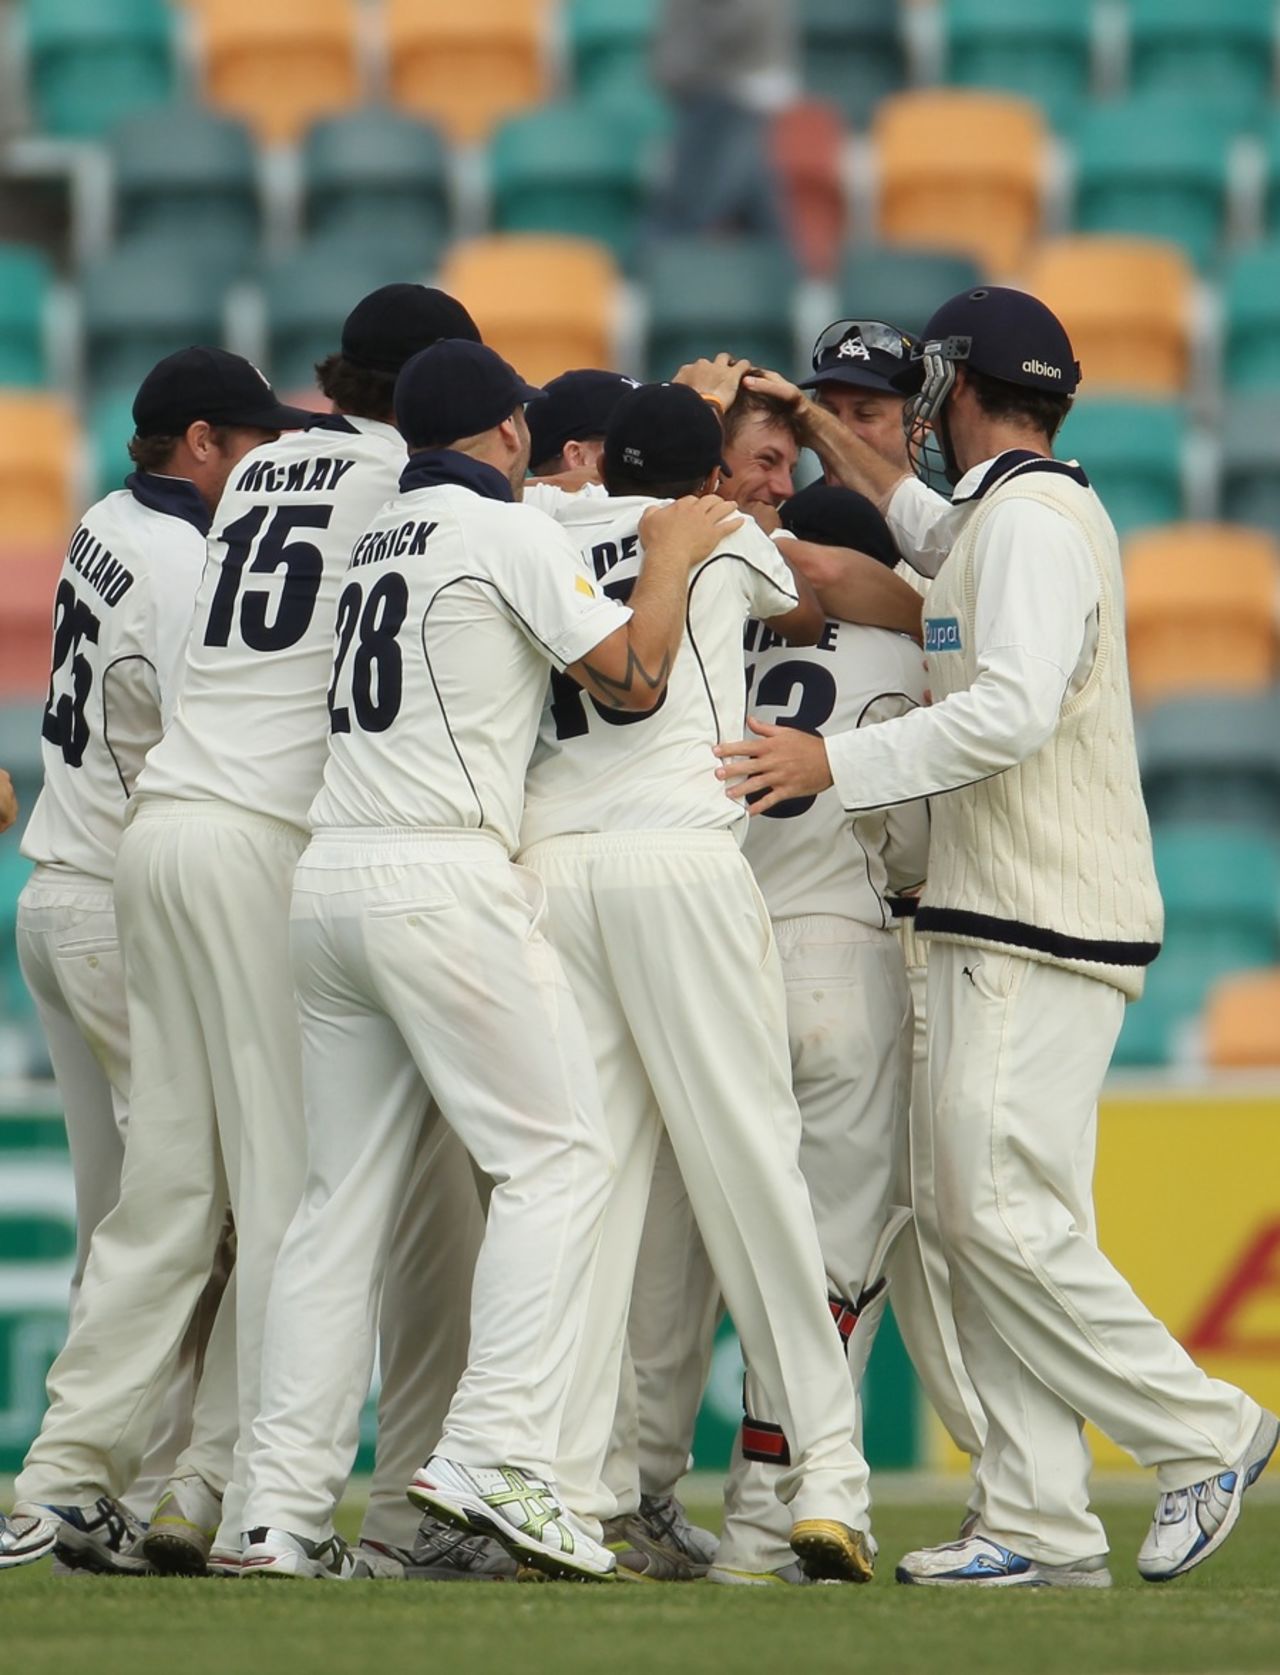 James Pattinson embraced by team-mates after taking the final wicket, Tasmania v Victoria, Sheffield Shield, day 4, Hobart, Nov 7 2011